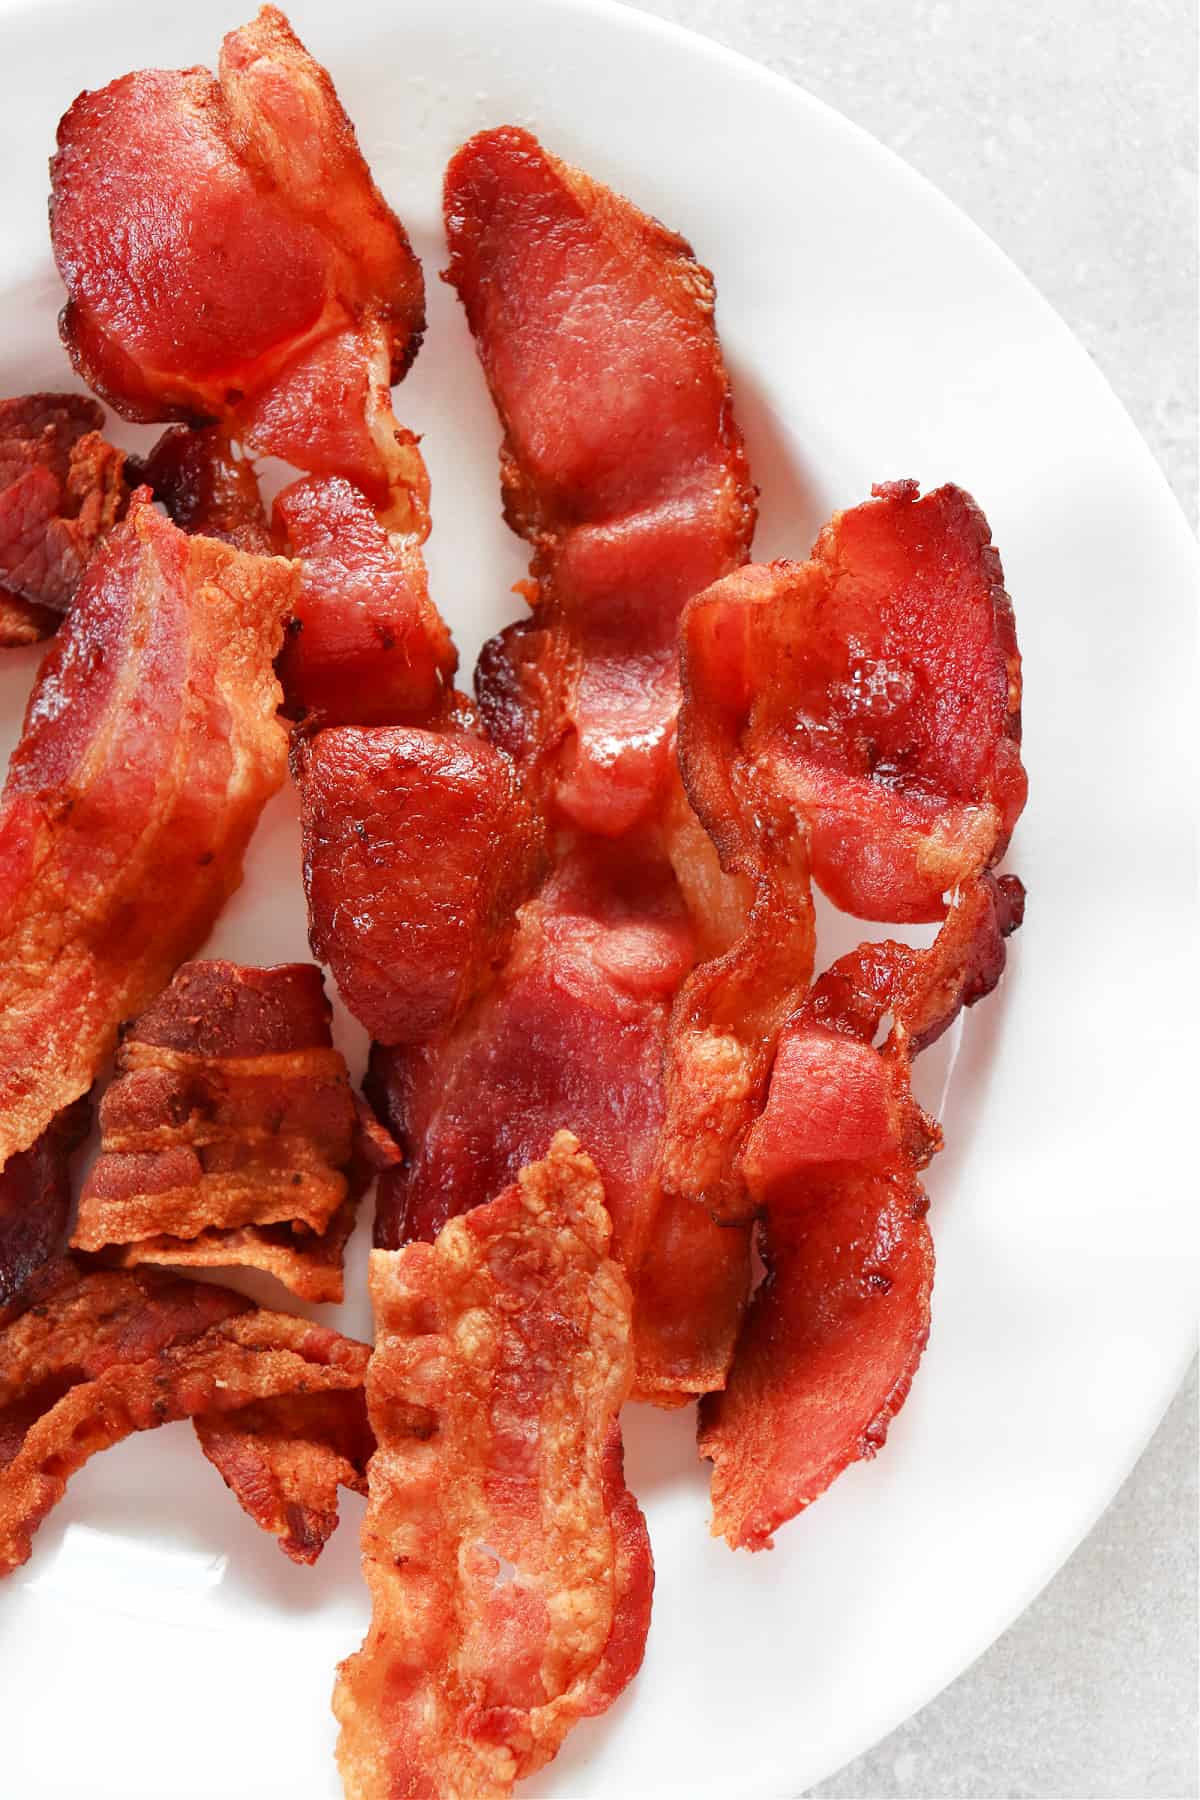 Cooked bacon on white plate.